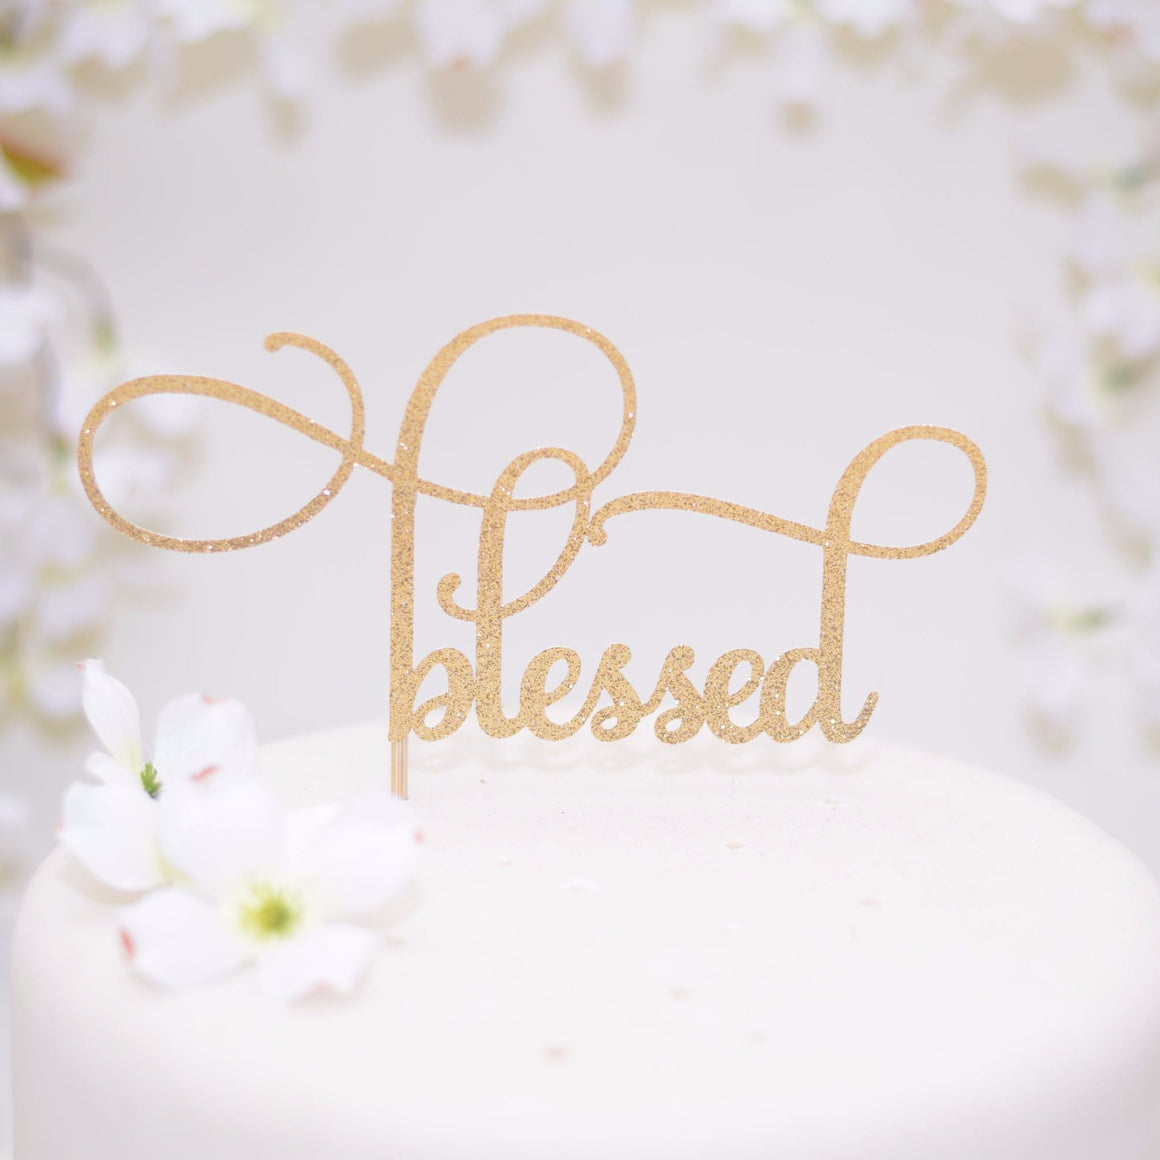 Elegant Blessed gold glitter cake topper on a white cake with floral details